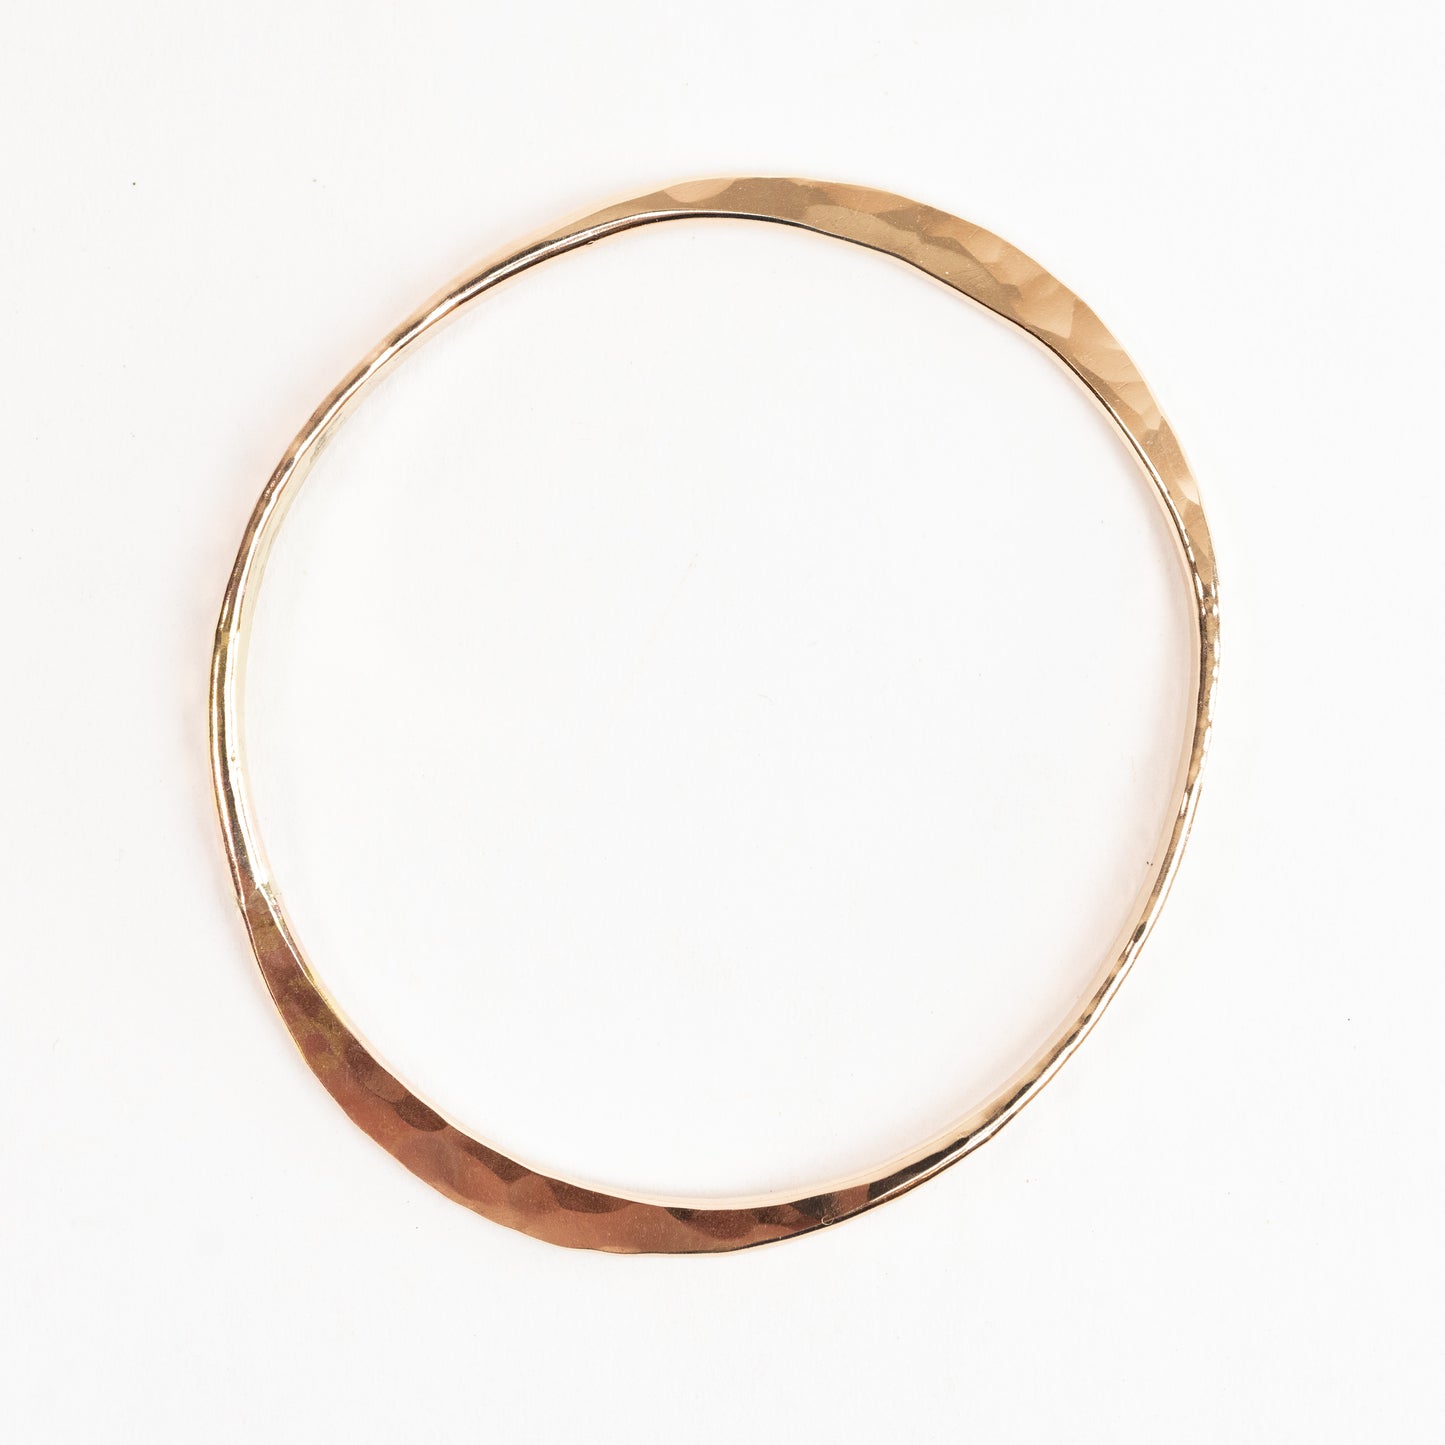 Bangle Bracelet - 14k Solid Yellow Gold - hand forged into an Oval - Heavy 8 gauge